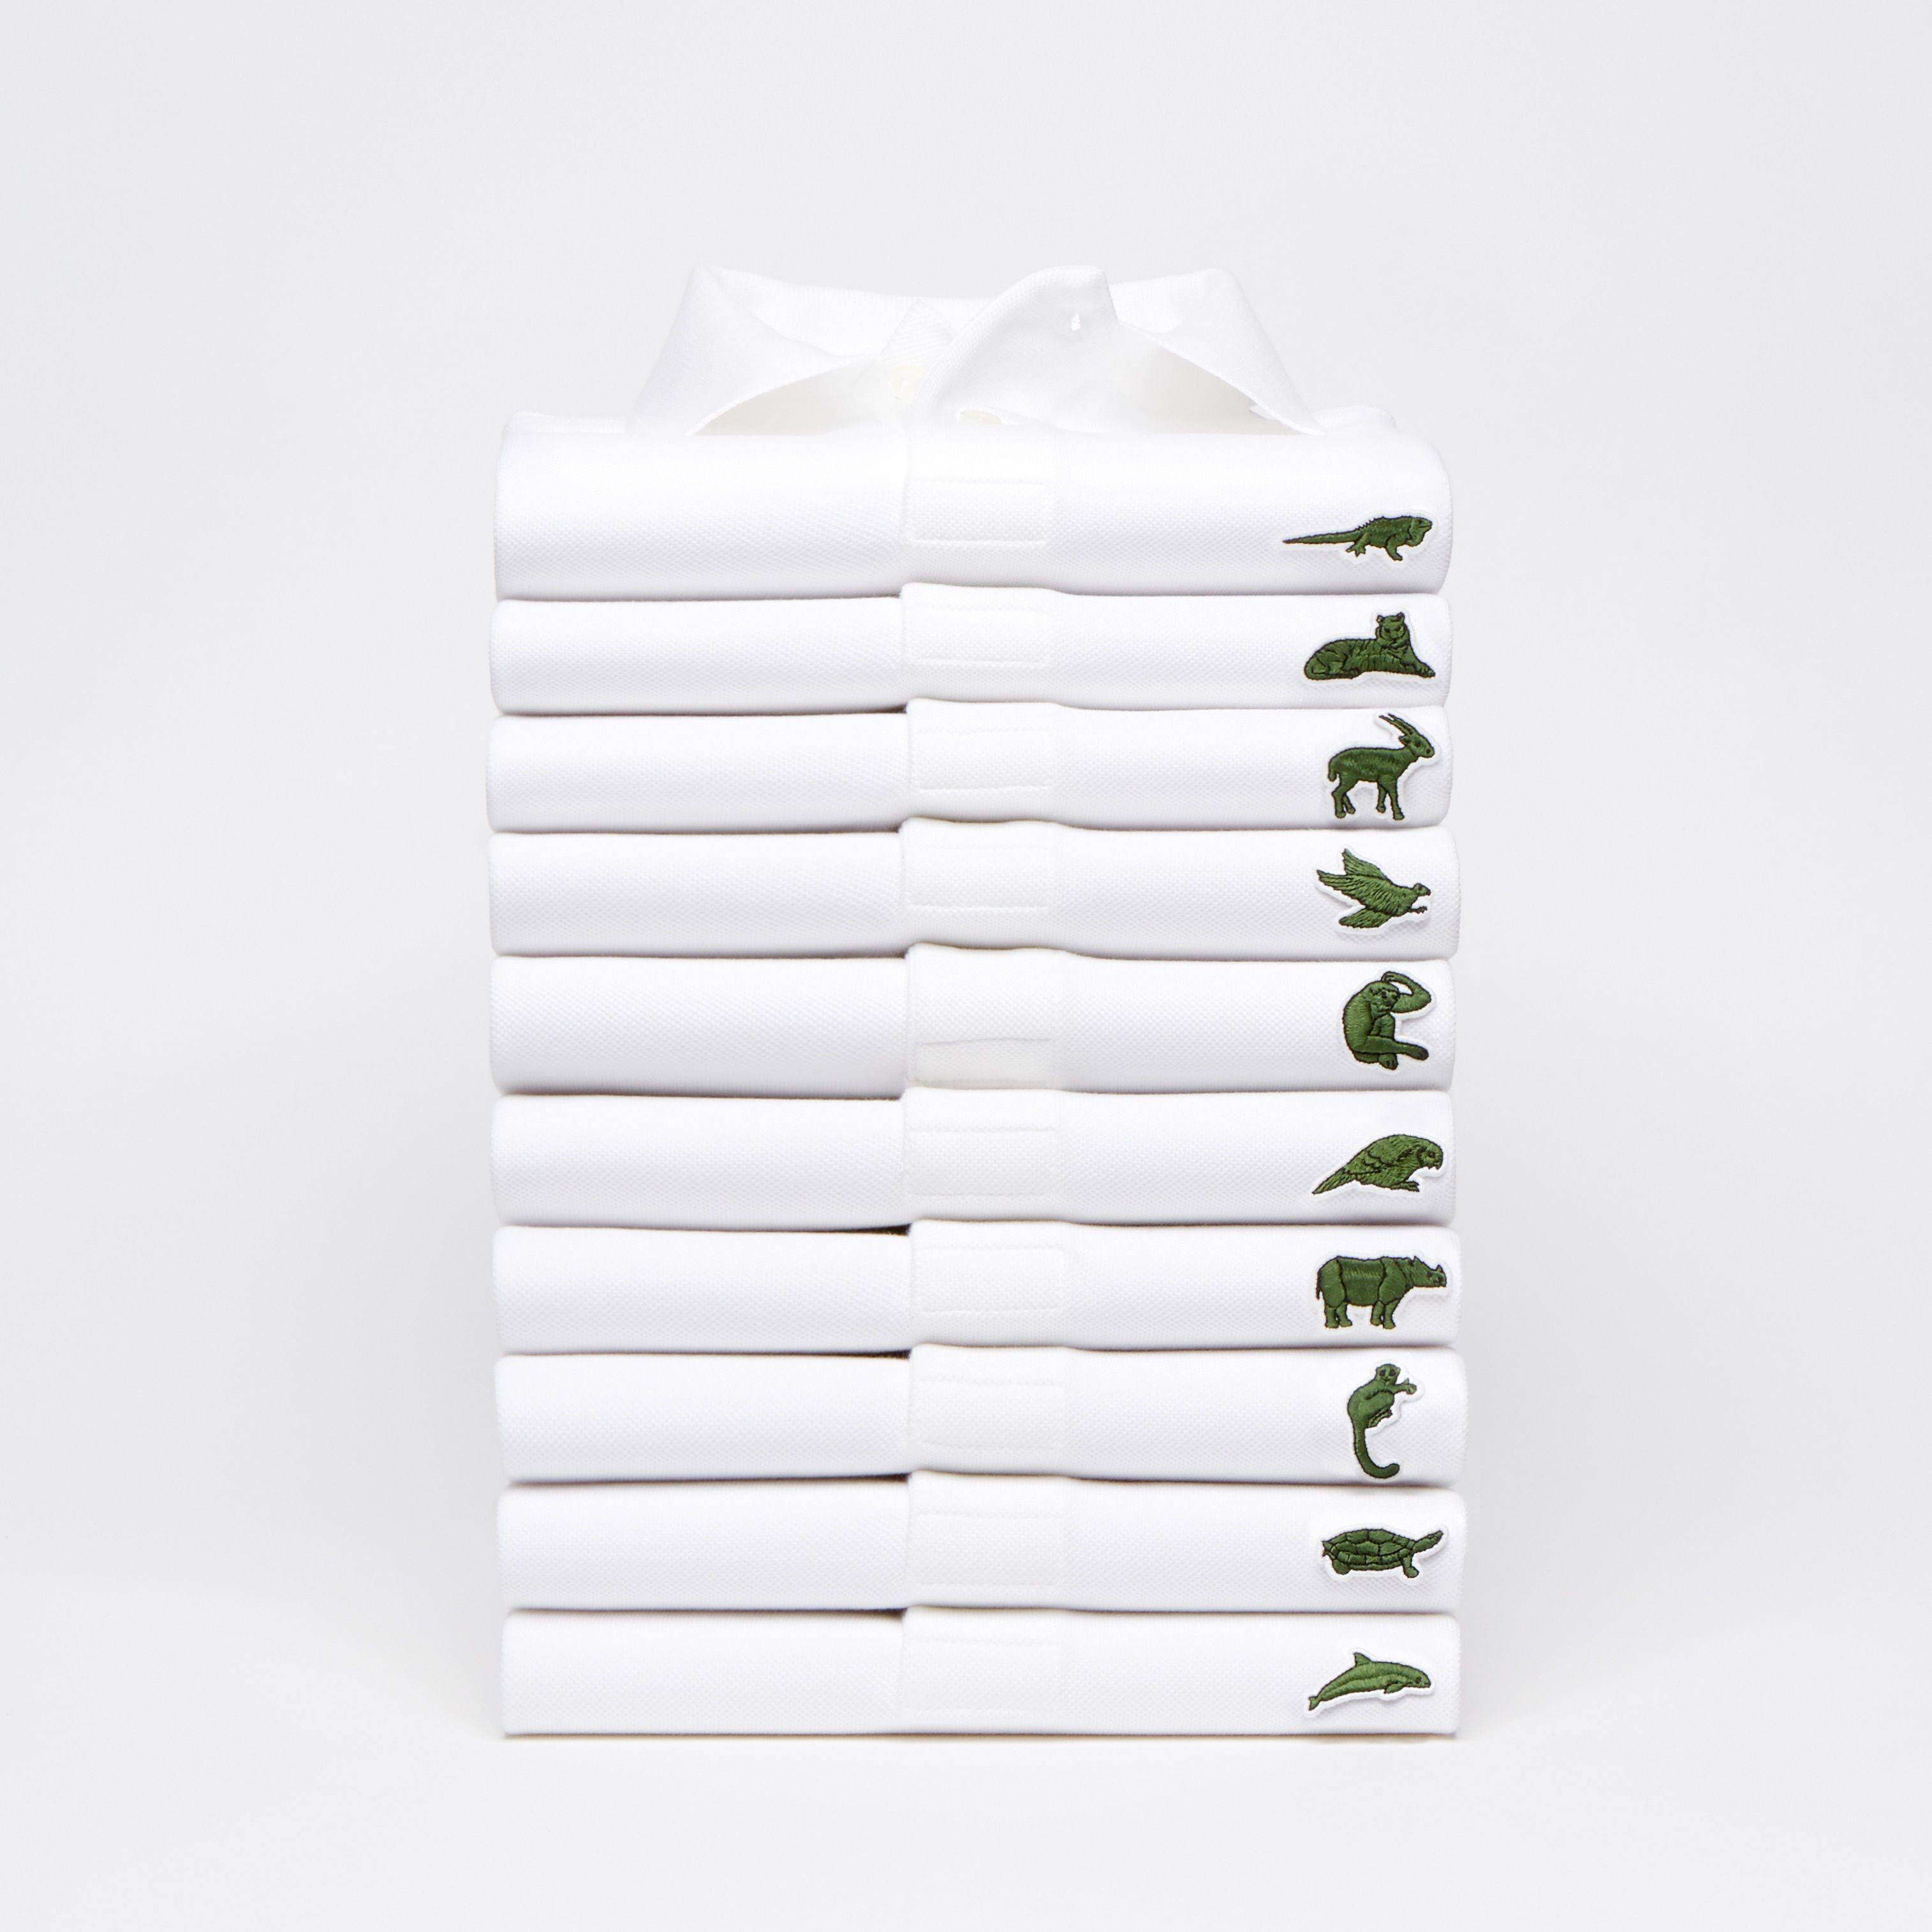 lacoste save our species buy online